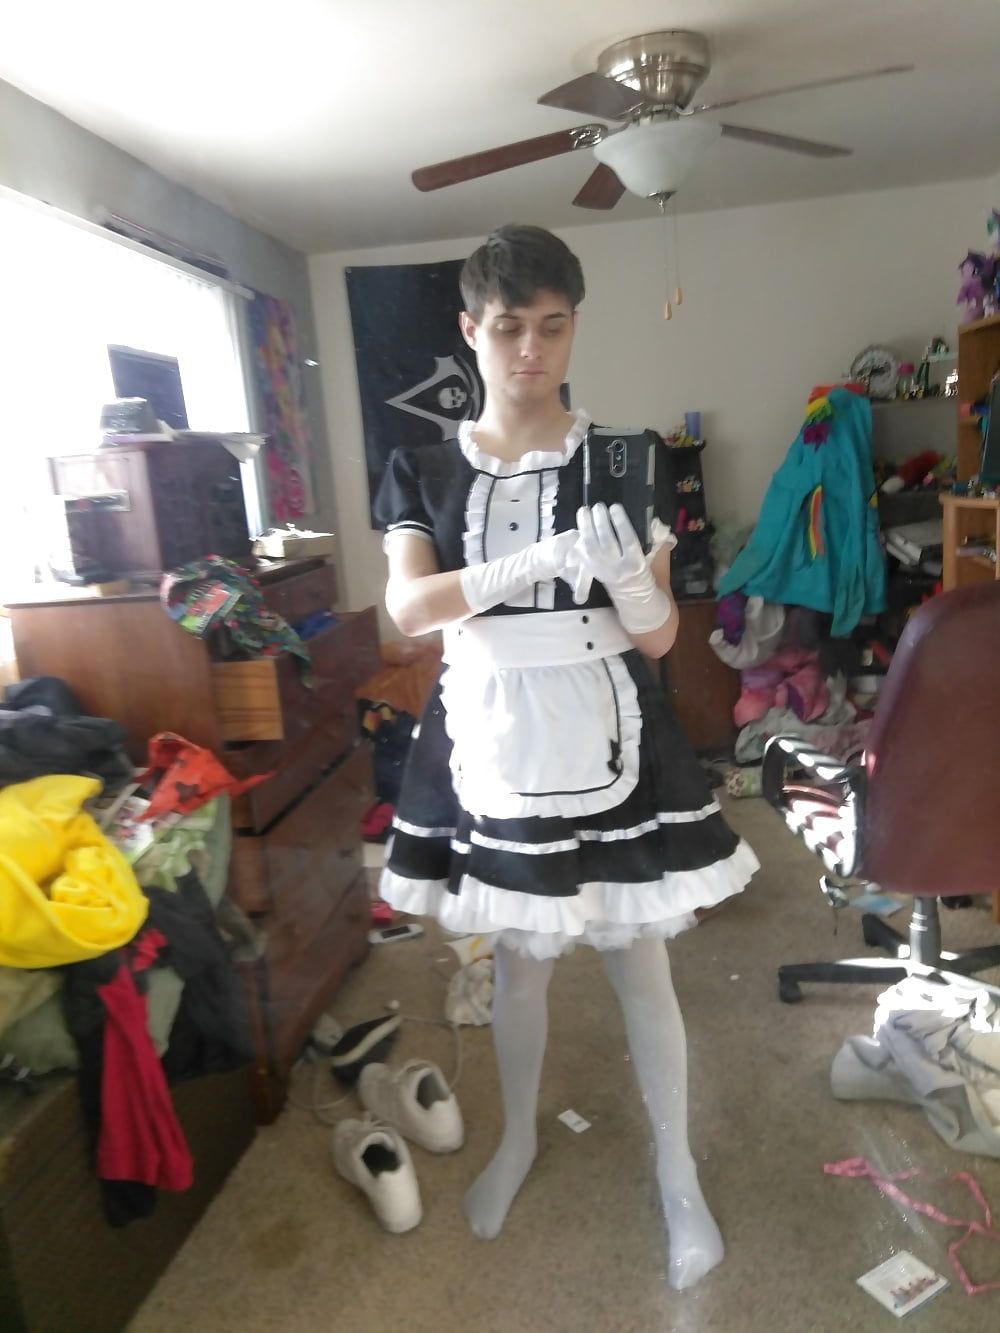 New maids outfit pics and updates #5